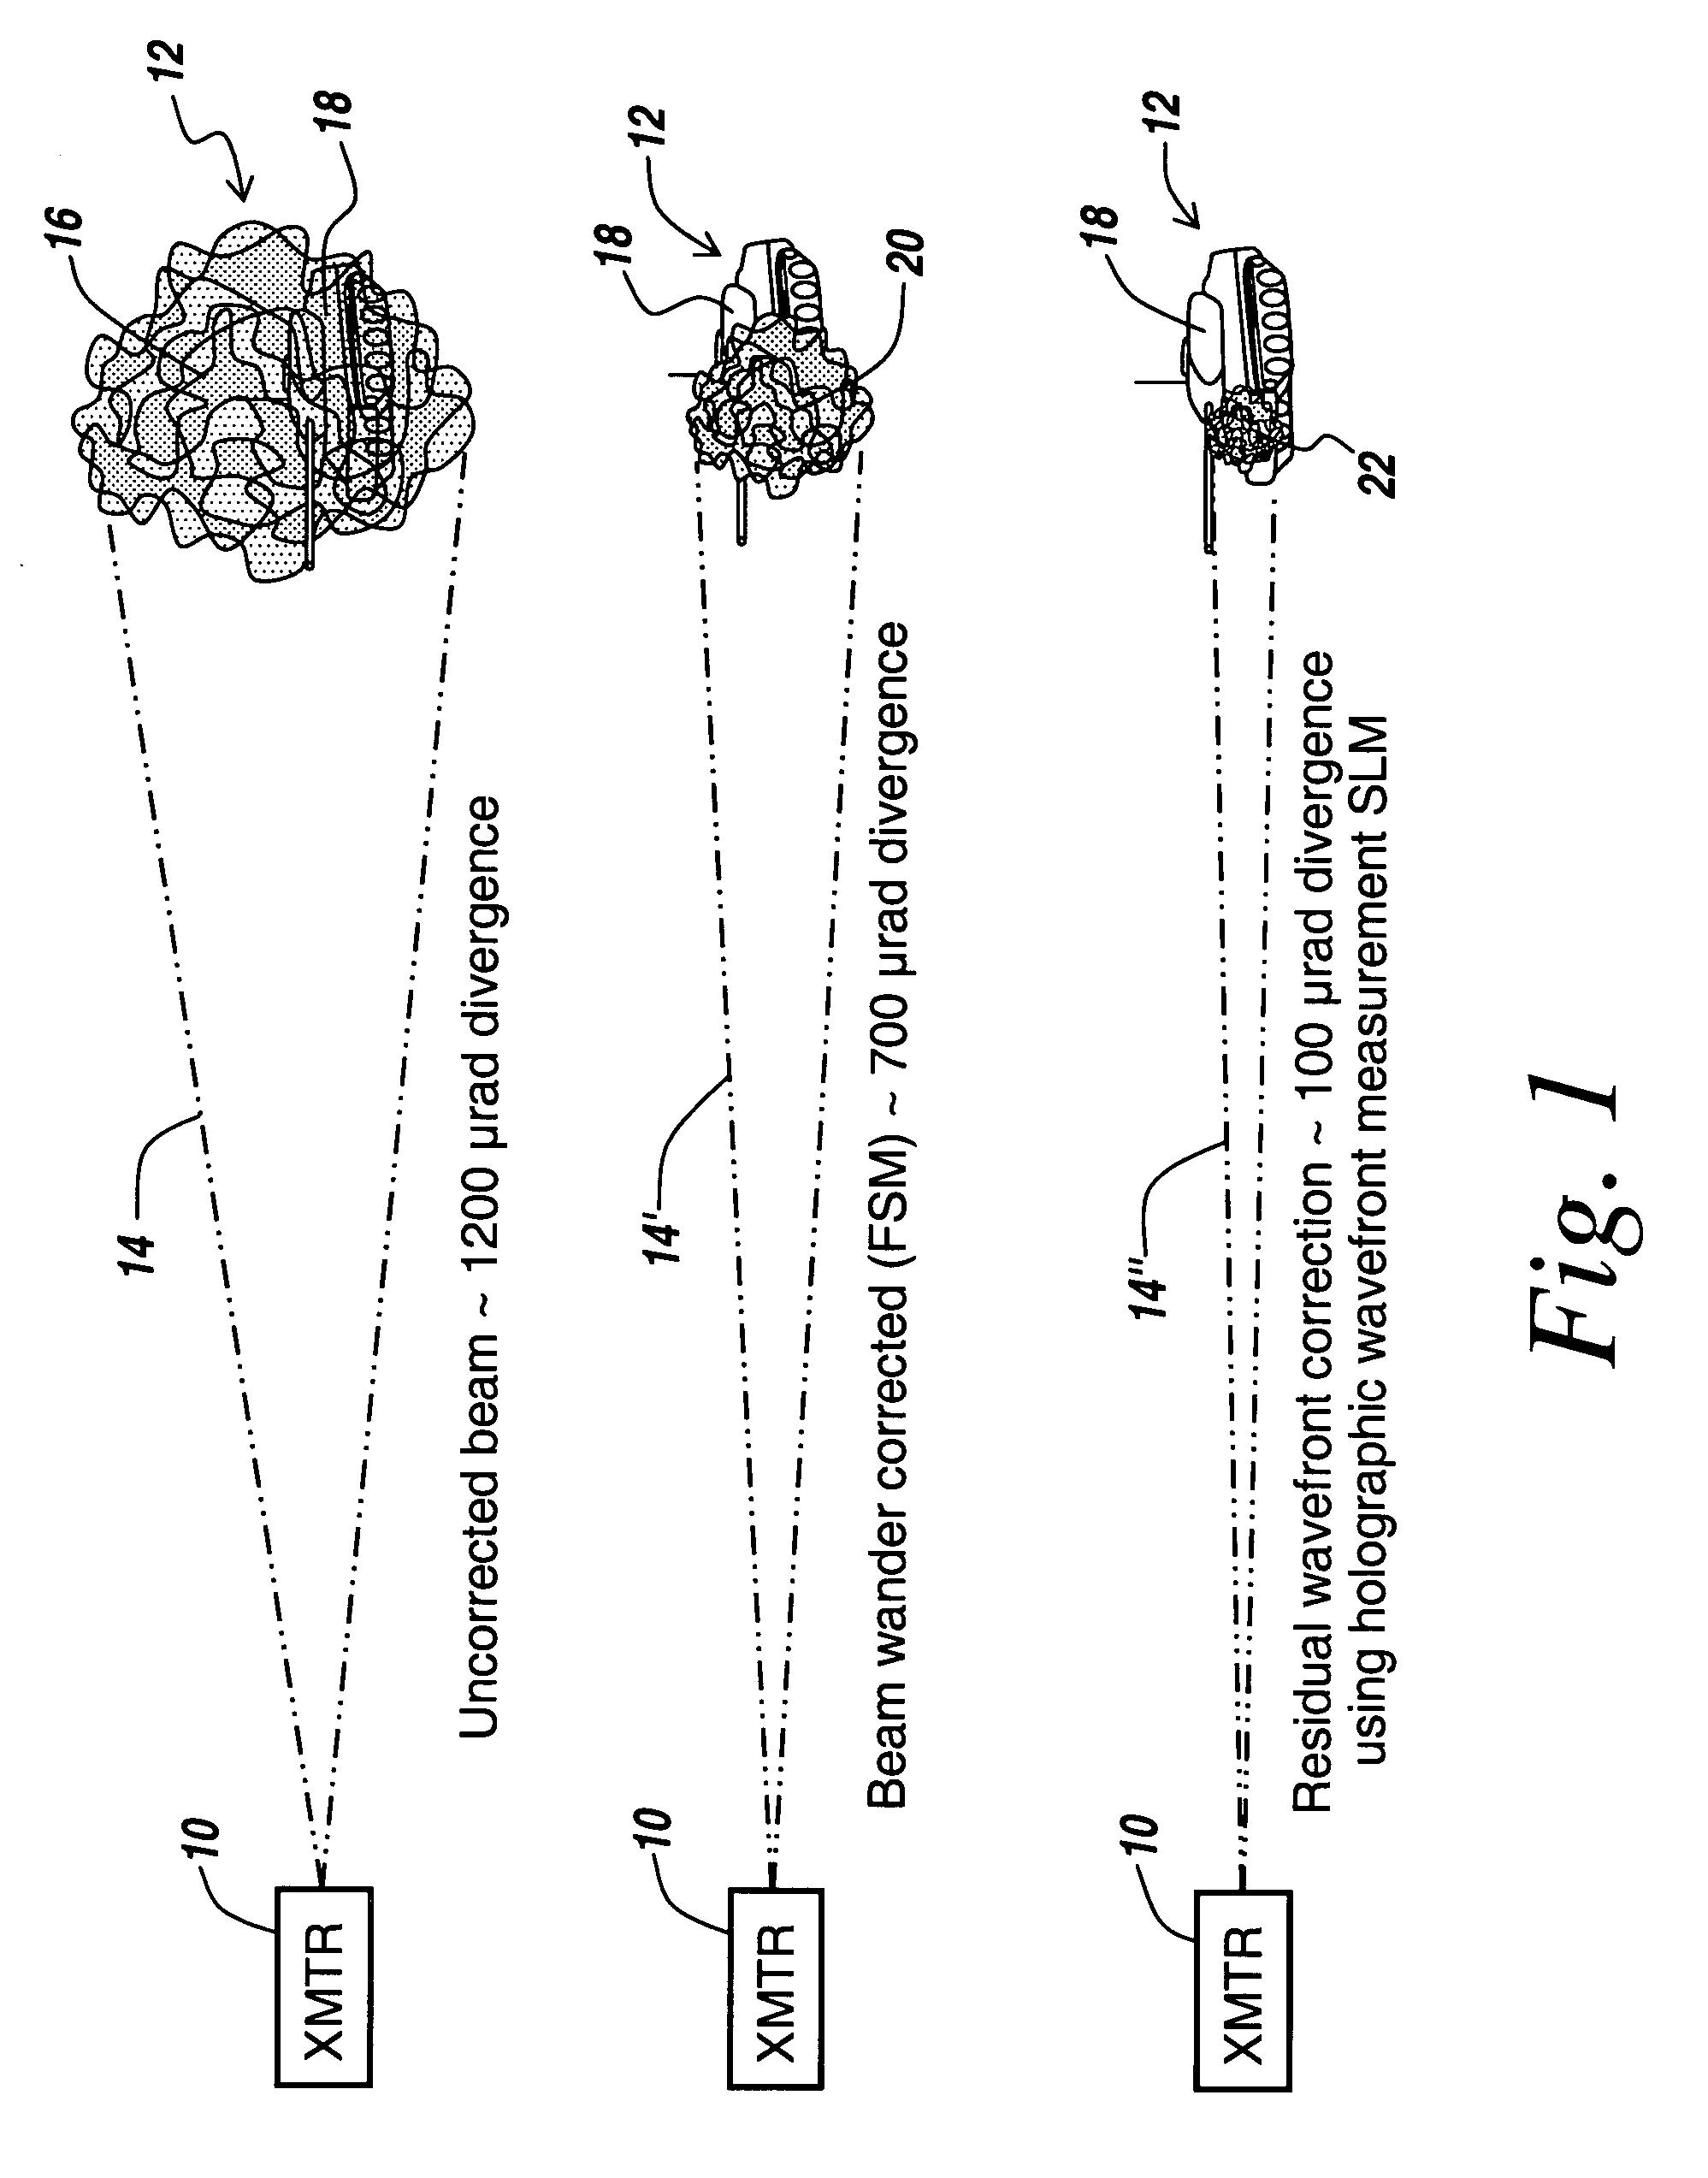 Method and apparatus for compensating for atmospheric turbulence based on holographic atmospheric turbulence sampling